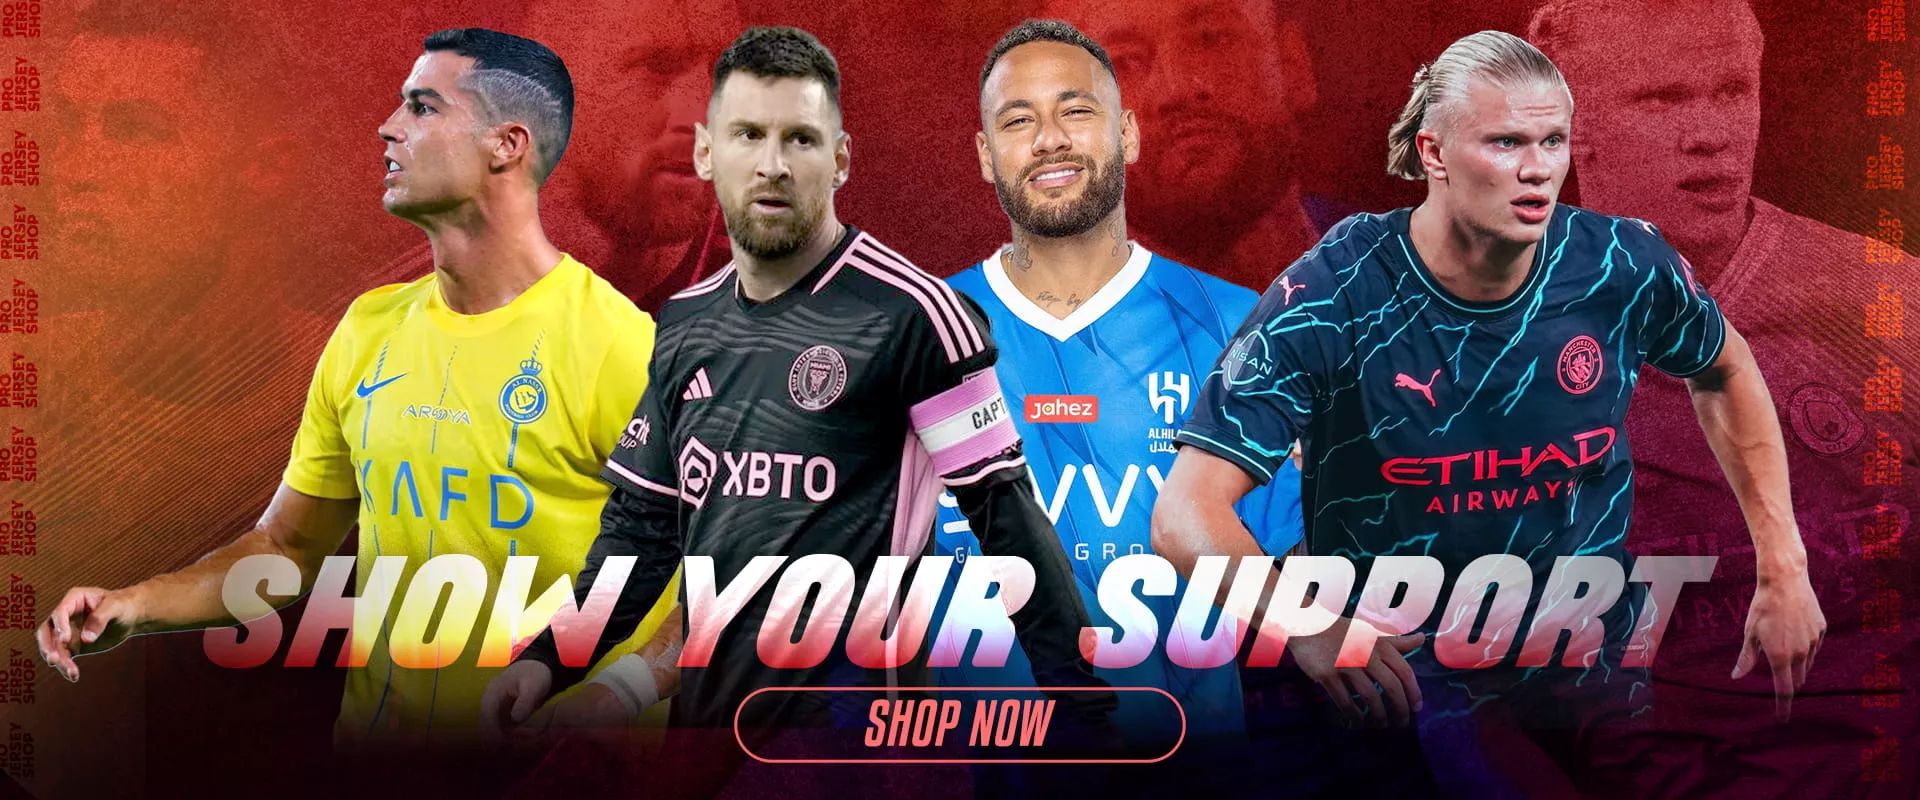 Show Your Support For Players - Pro Jersey Shop